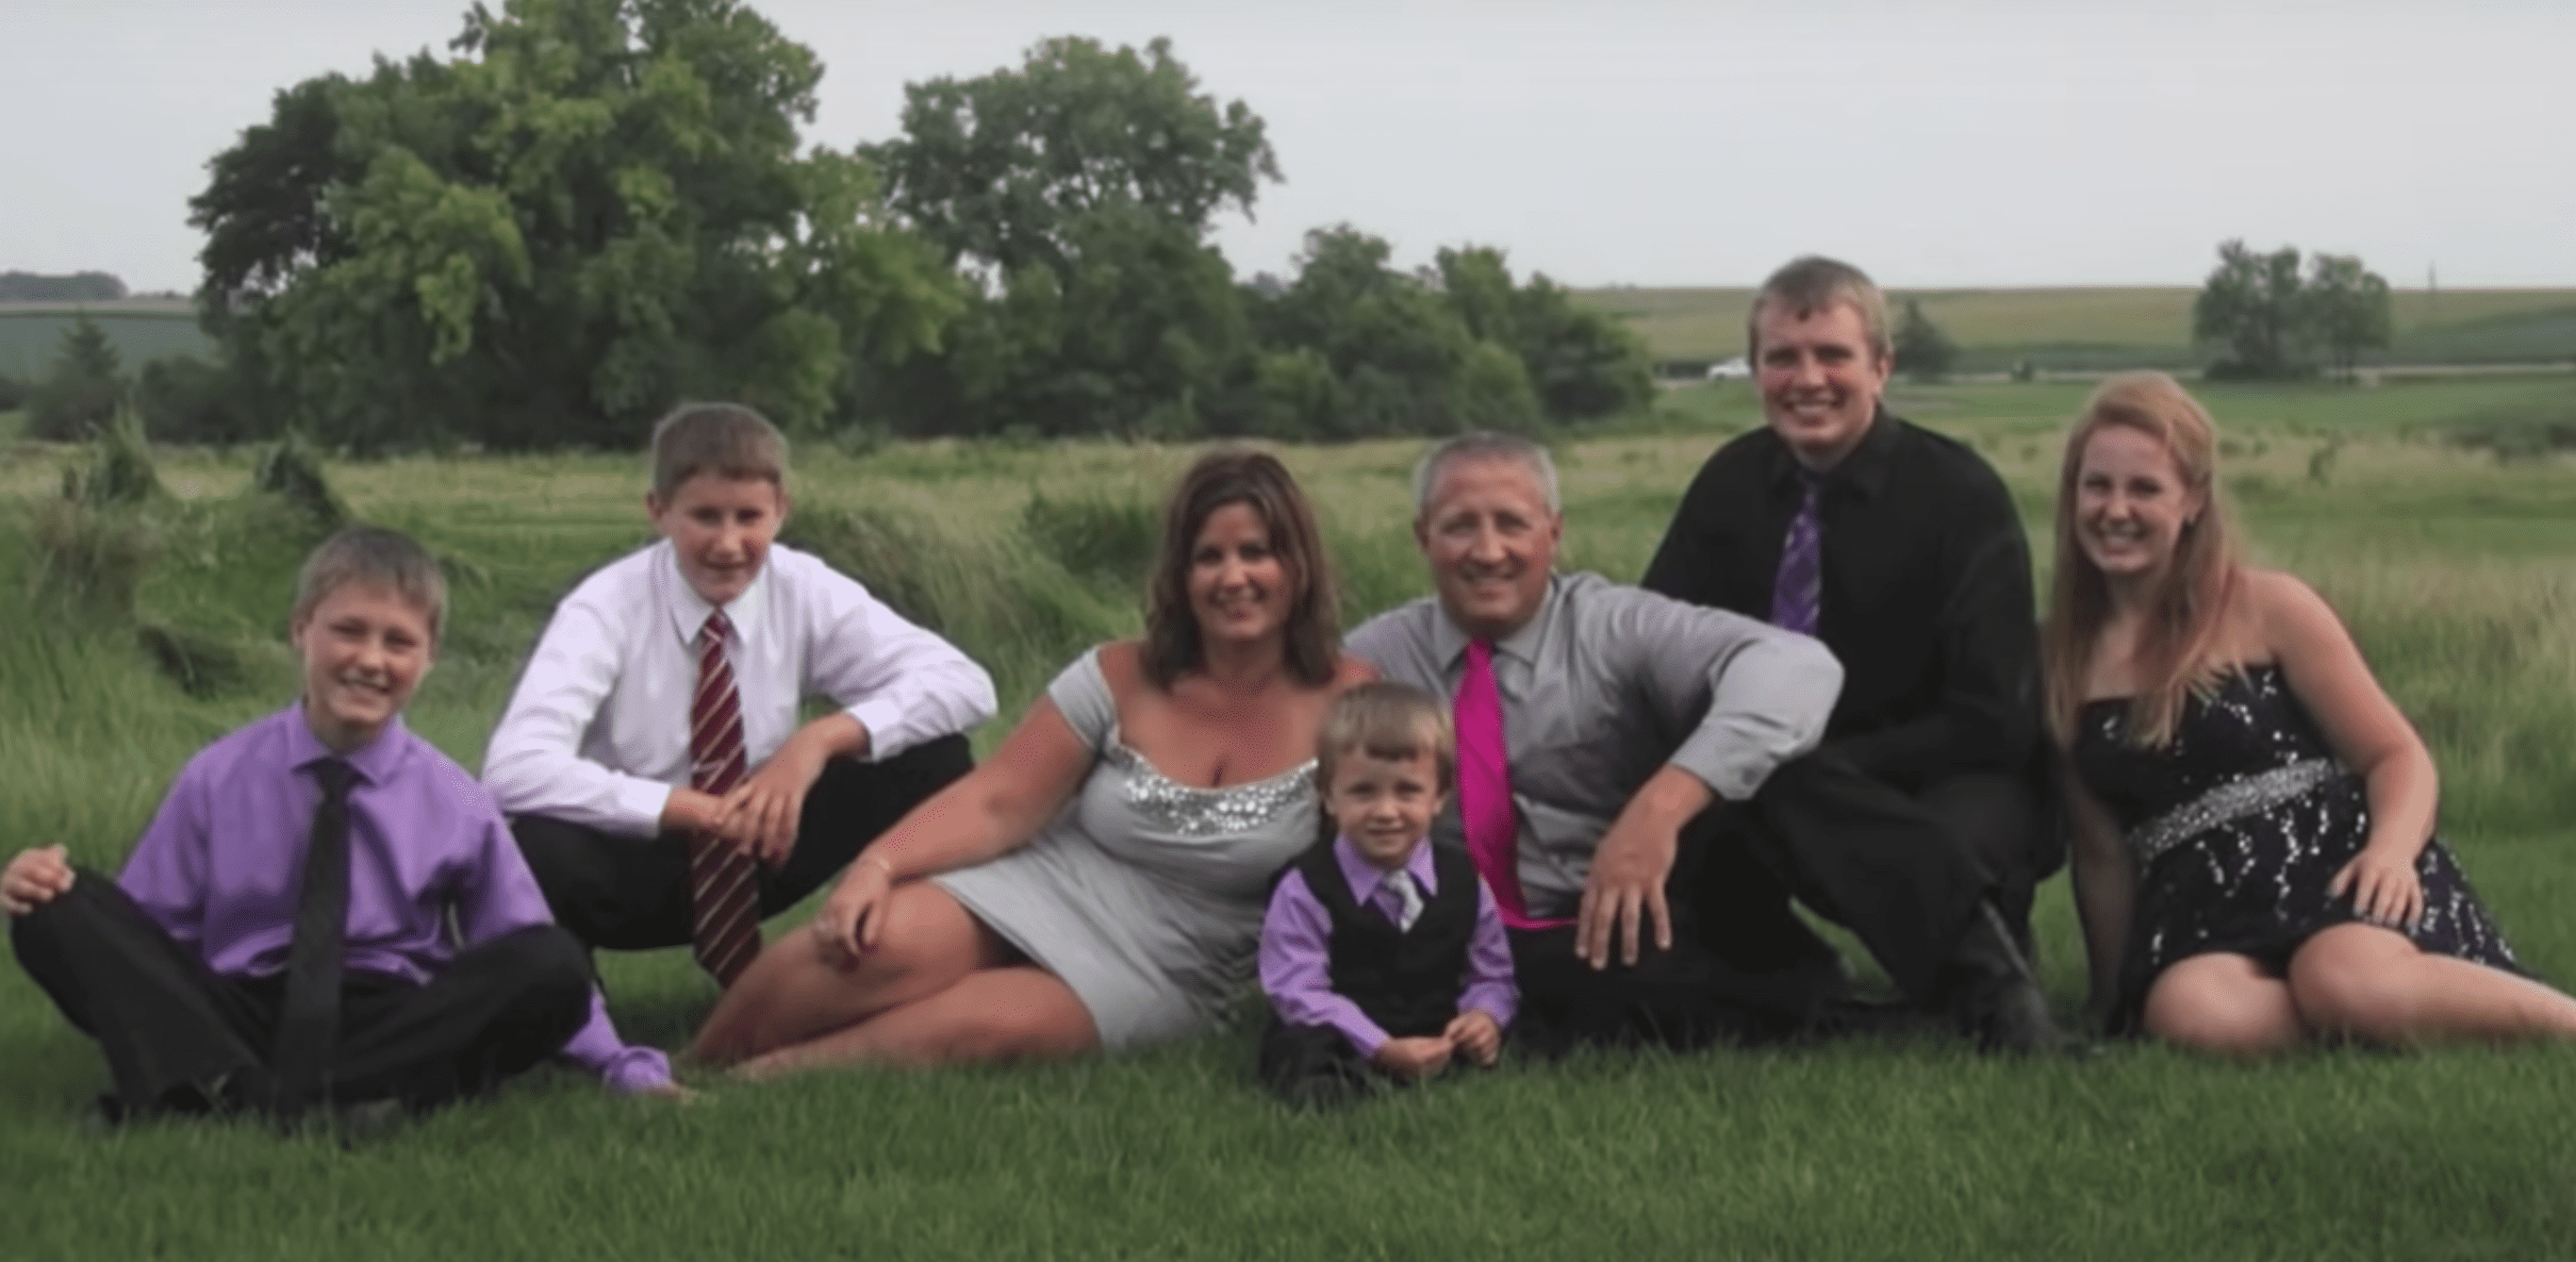 David Schmitz with his blended family. | Source: youtube.com/star1025